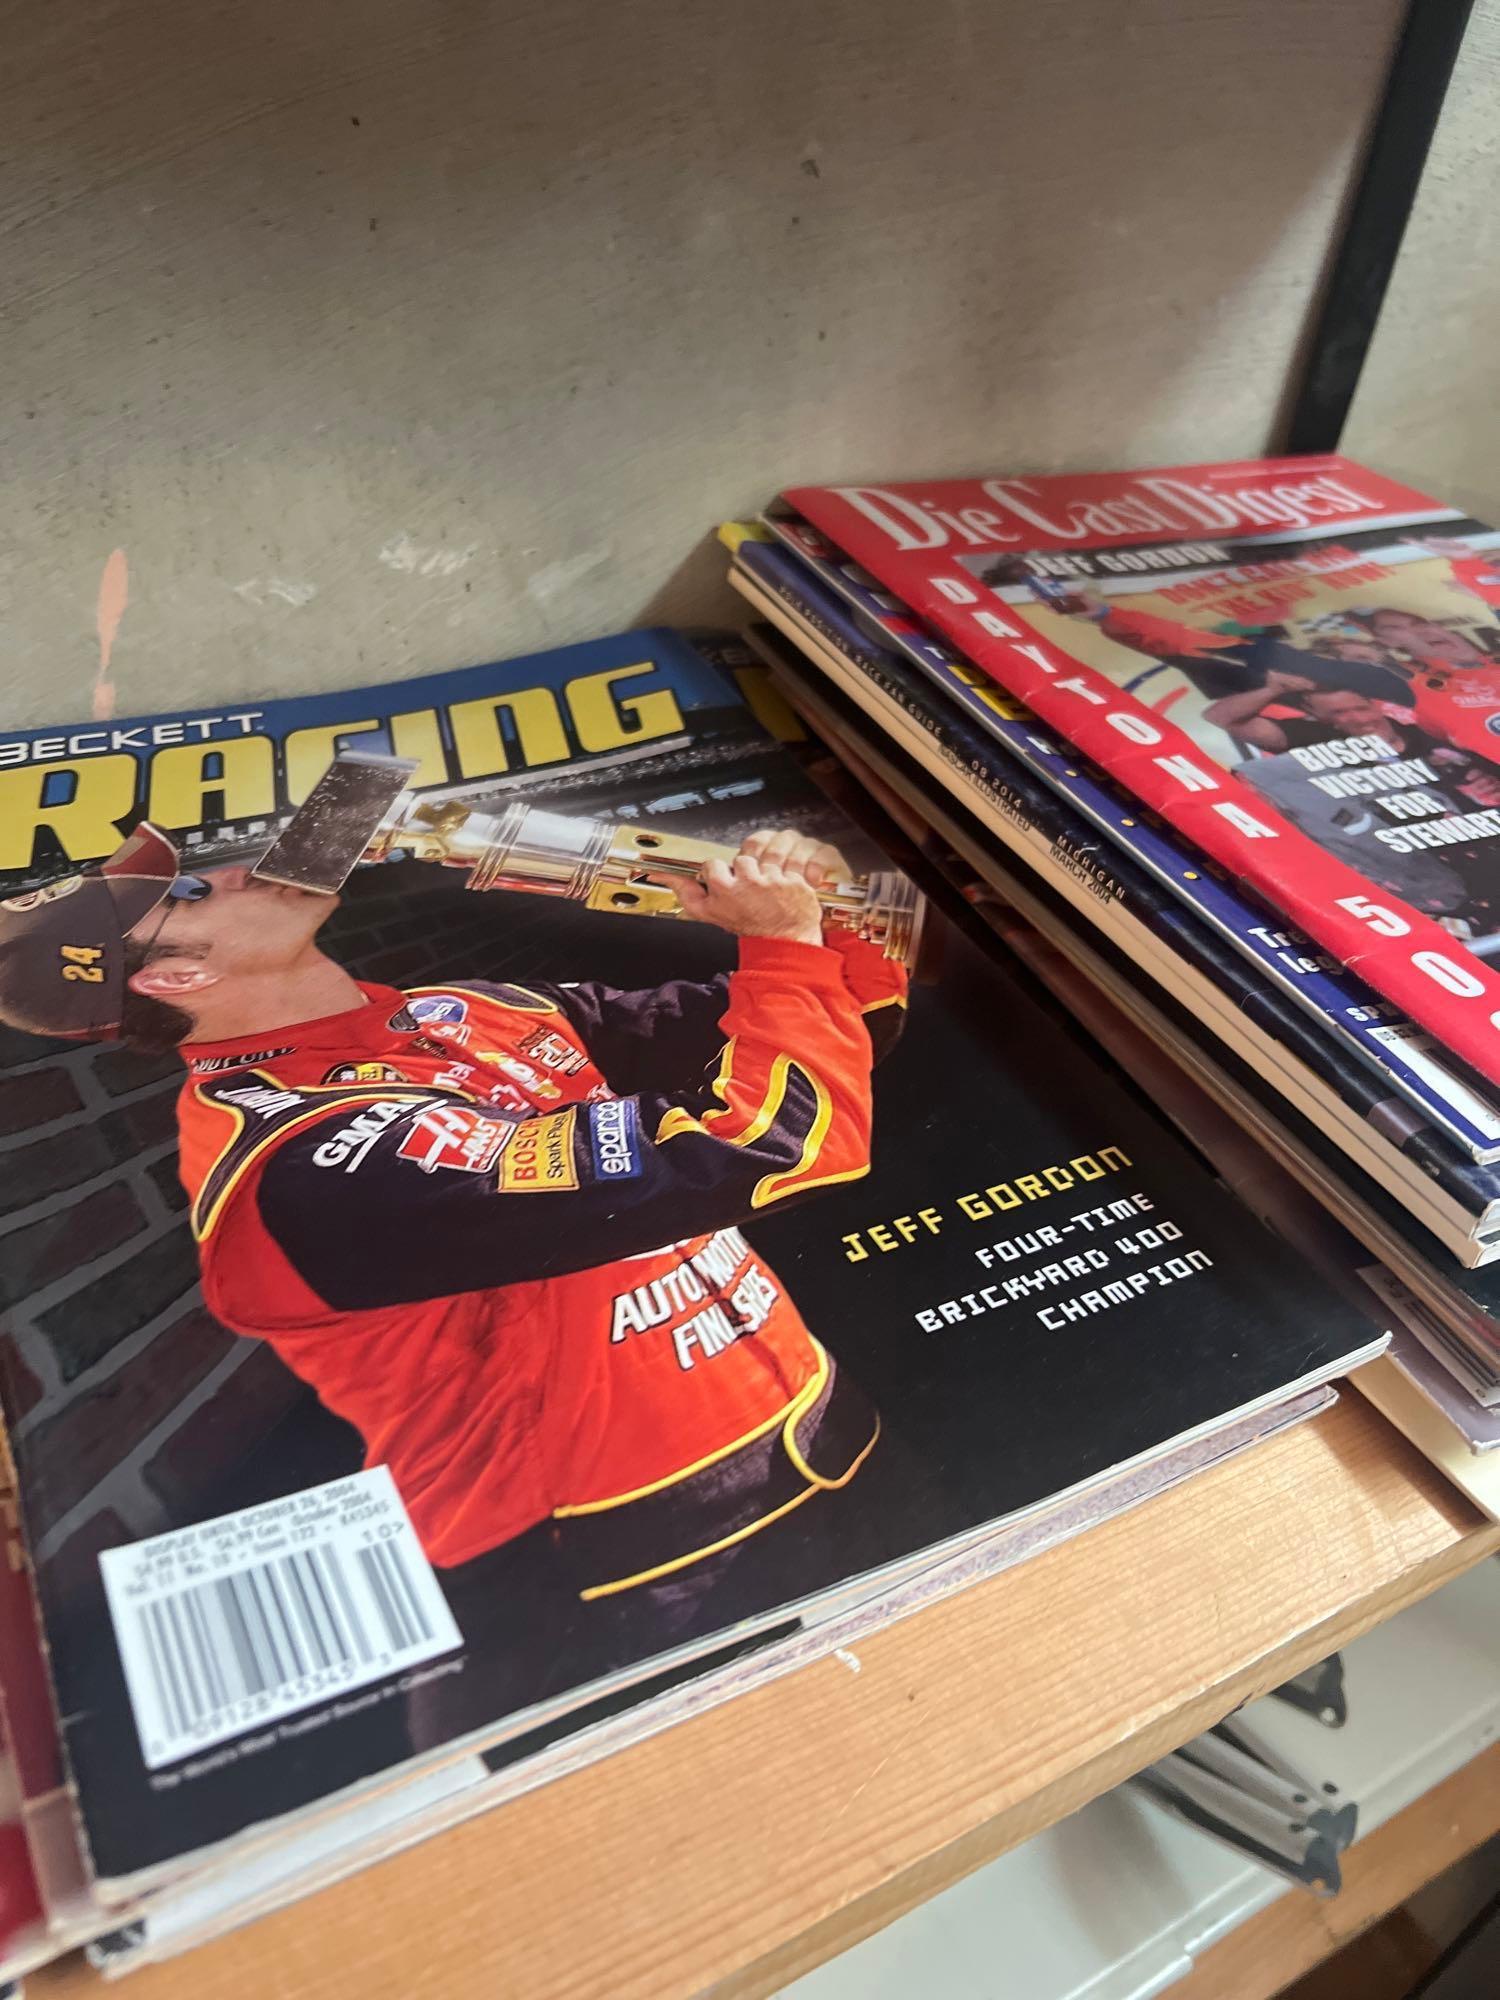 NASCAR books, magazines, and miscellaneous and basement